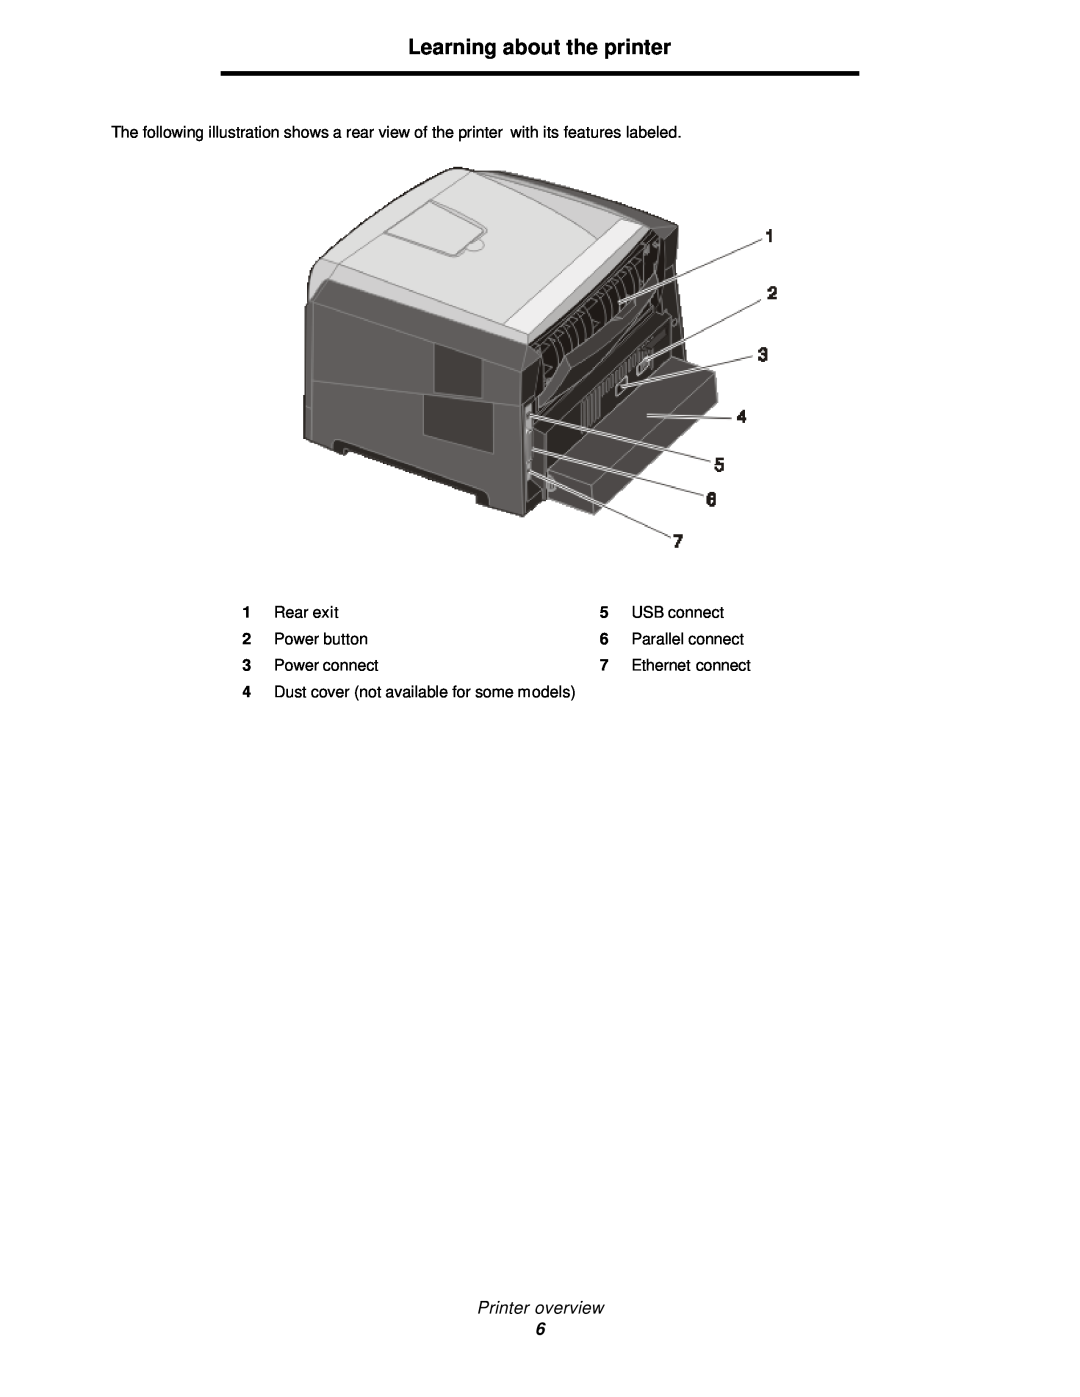 Lexmark 350d manual Learning about the printer, Printer overview, Ethernet connect 